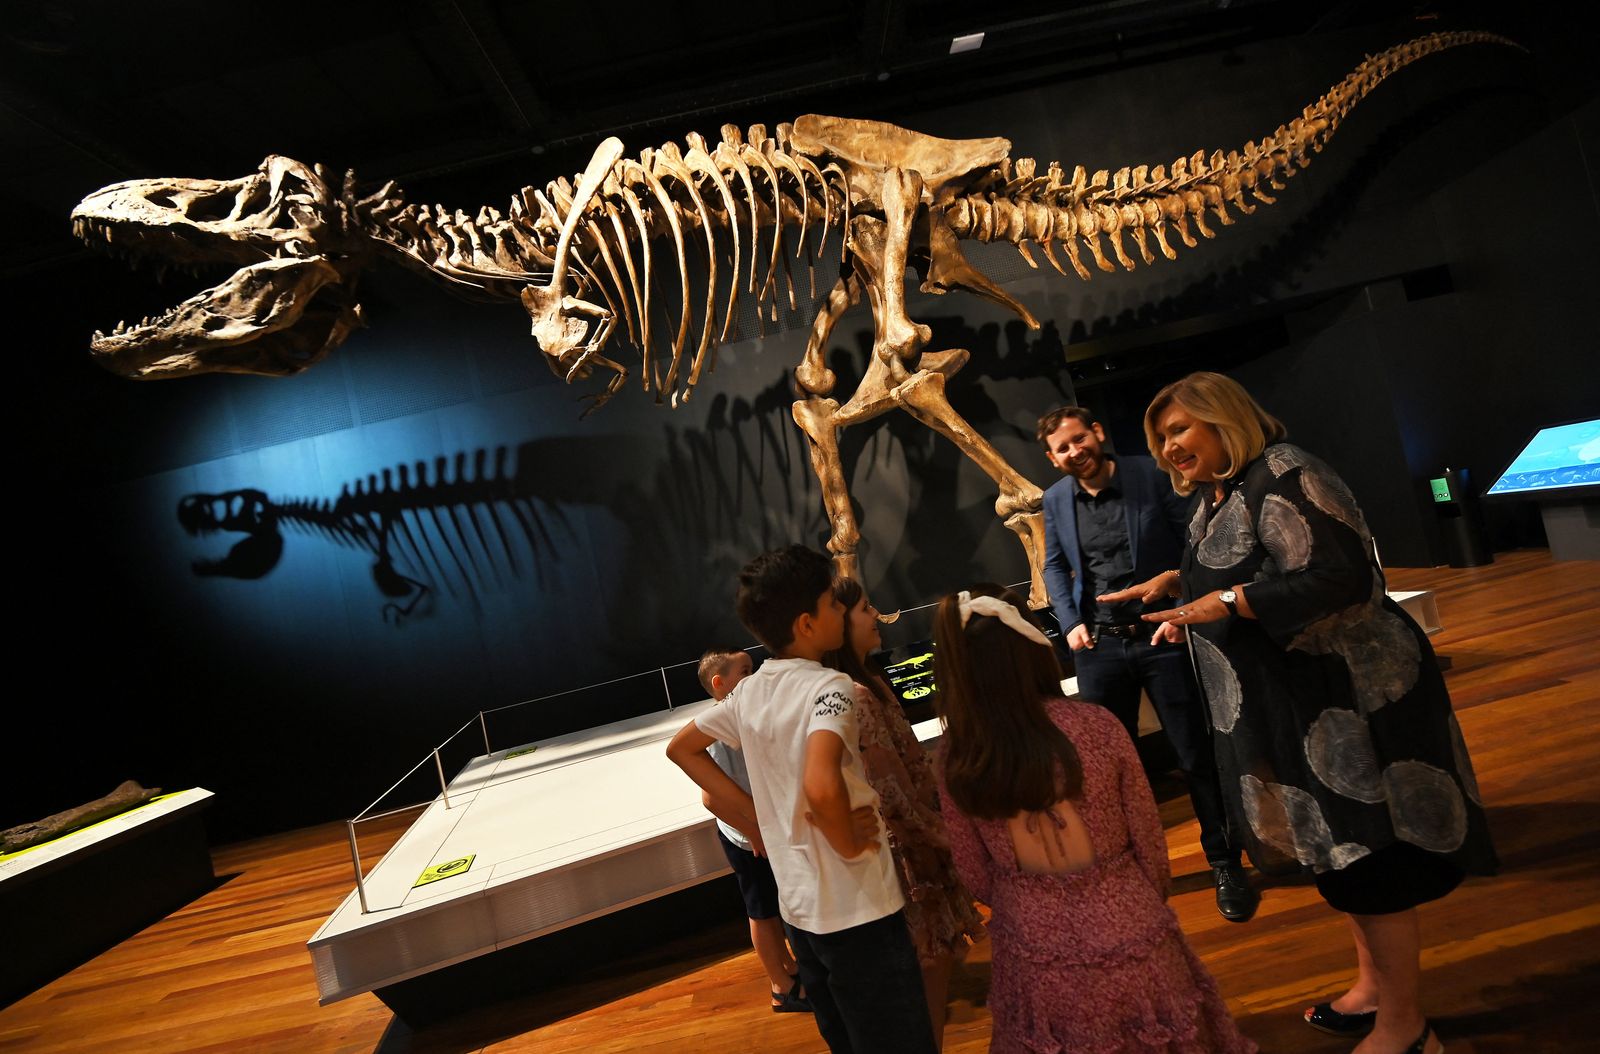 Director and CEO of the Australian Museum Kim McKay speaks to children in the Tyrannosaurs exhibit during the reopening of the Australian Museum in Sydney on November 26, 2020. (Photo by Steven SAPHORE / AFP) - AFP